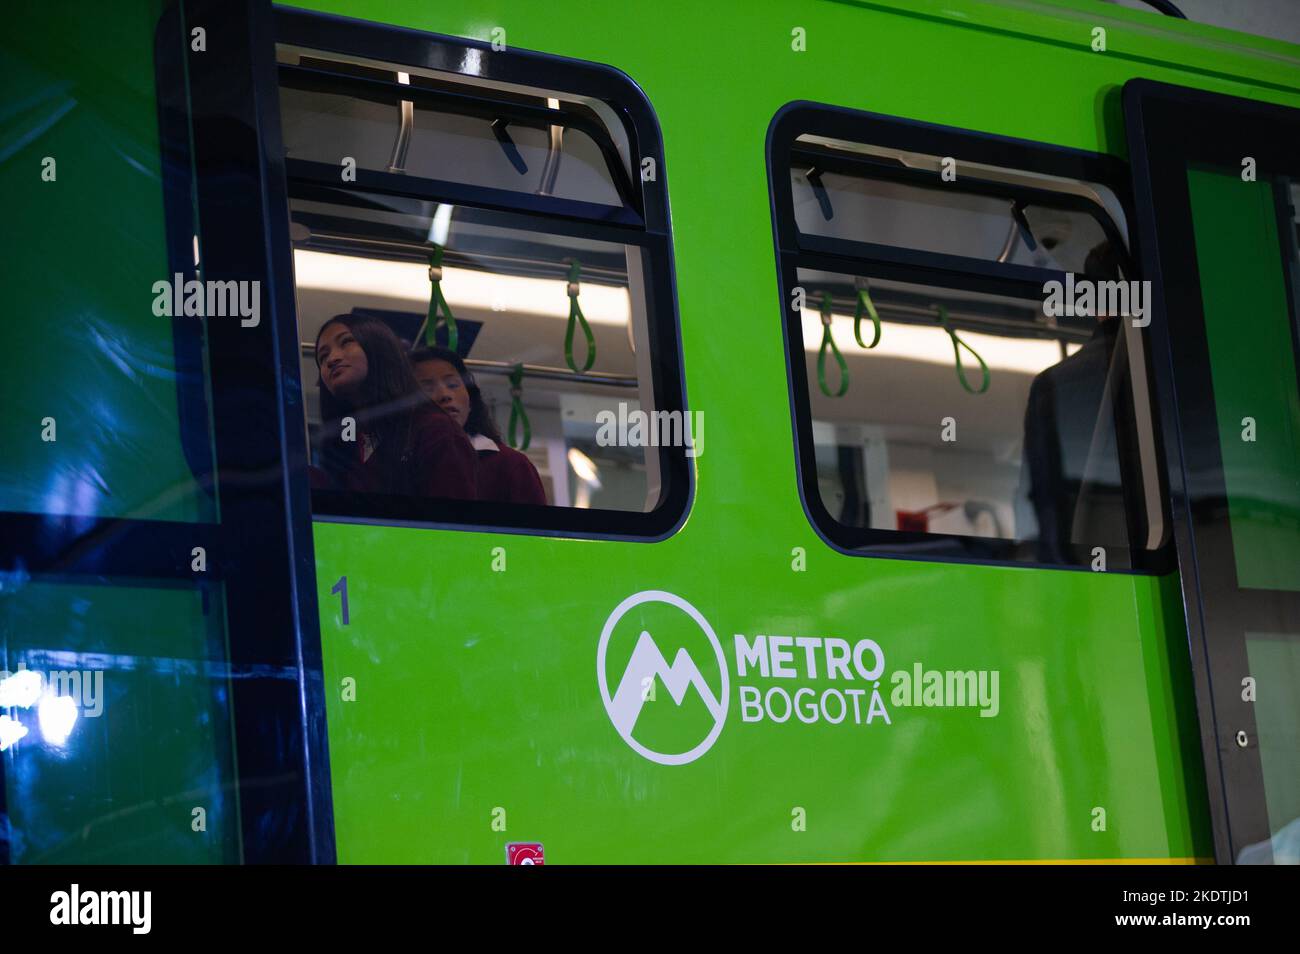 People take a look of the prototype of Bogota's metro car during the unveil event of Bogota's Metro car as Bogota's metro system starts works o be available to the public in 2026. Photo by: Chepa Beltran/Long Visual Press Stock Photo